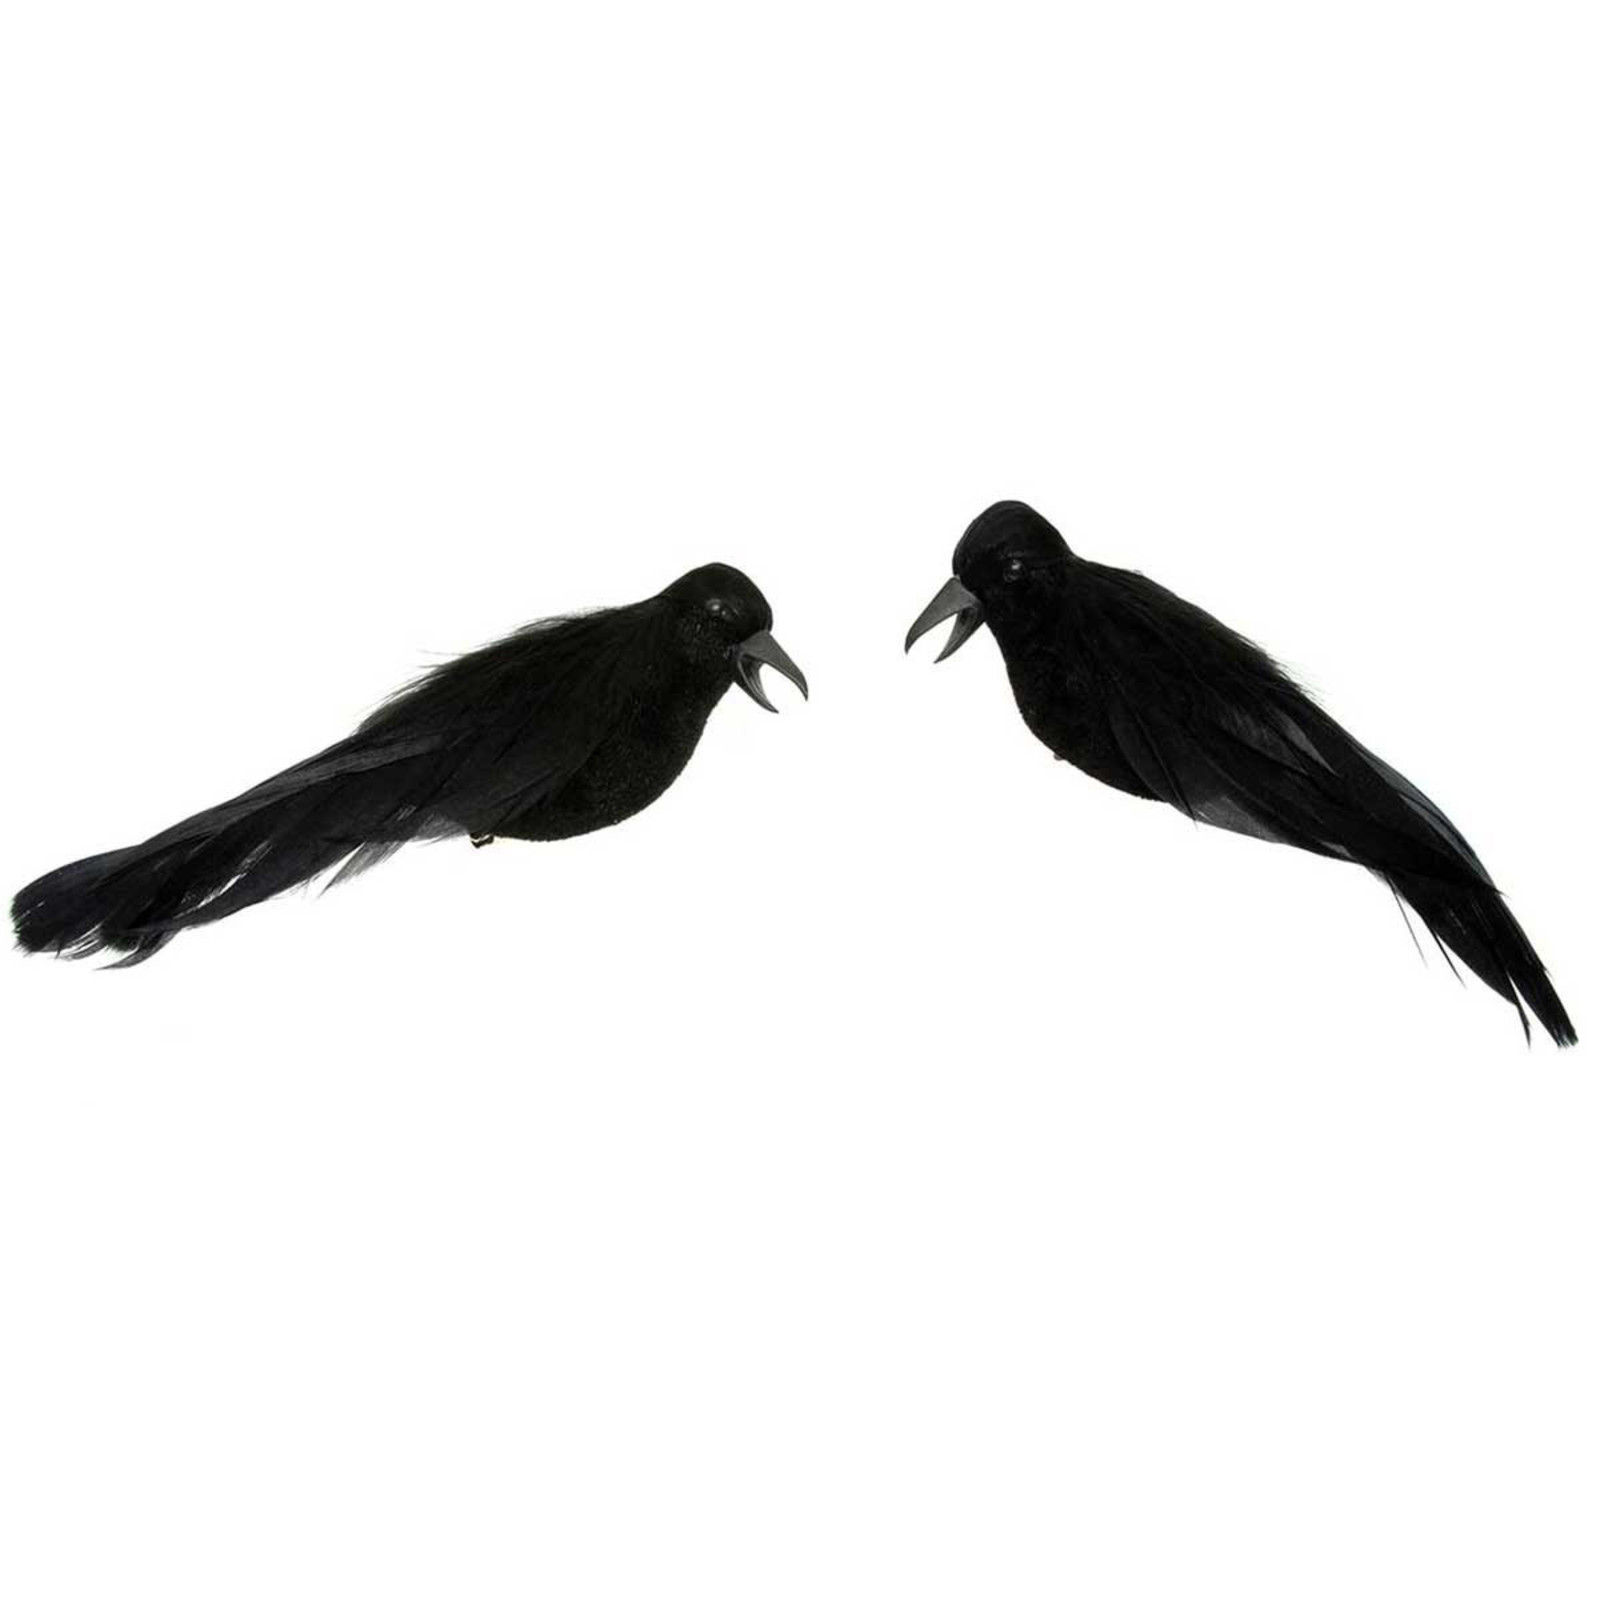 Meravic CROW VELVET BODY, FEATHERED LARGE  F2550 loading=